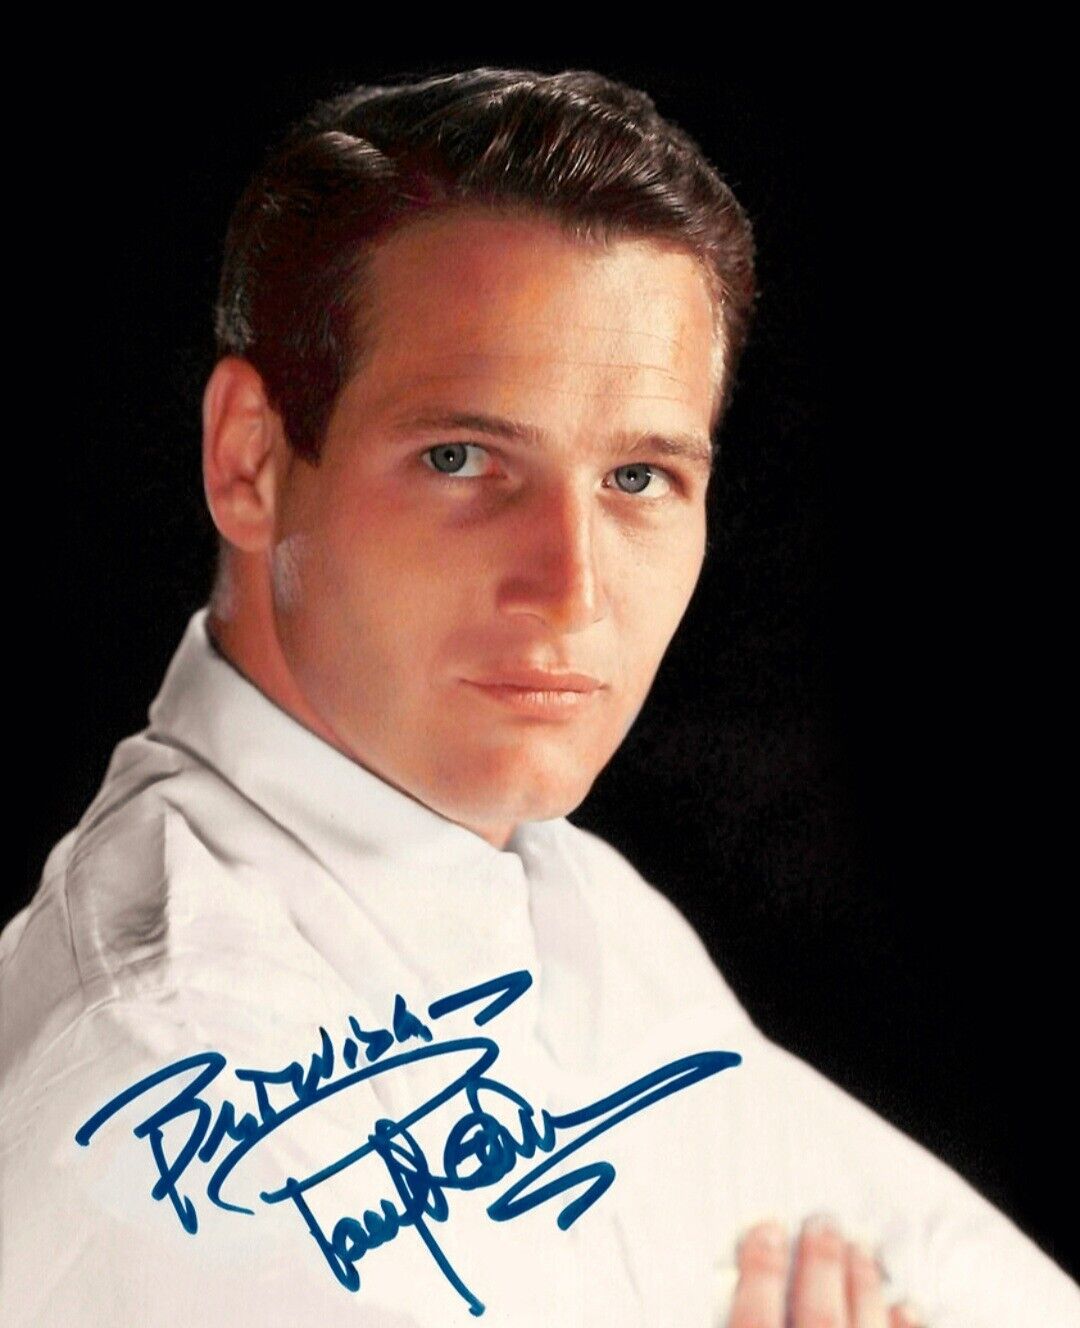 Paul Newman stunning vintage photograph with museum quality replica autograph